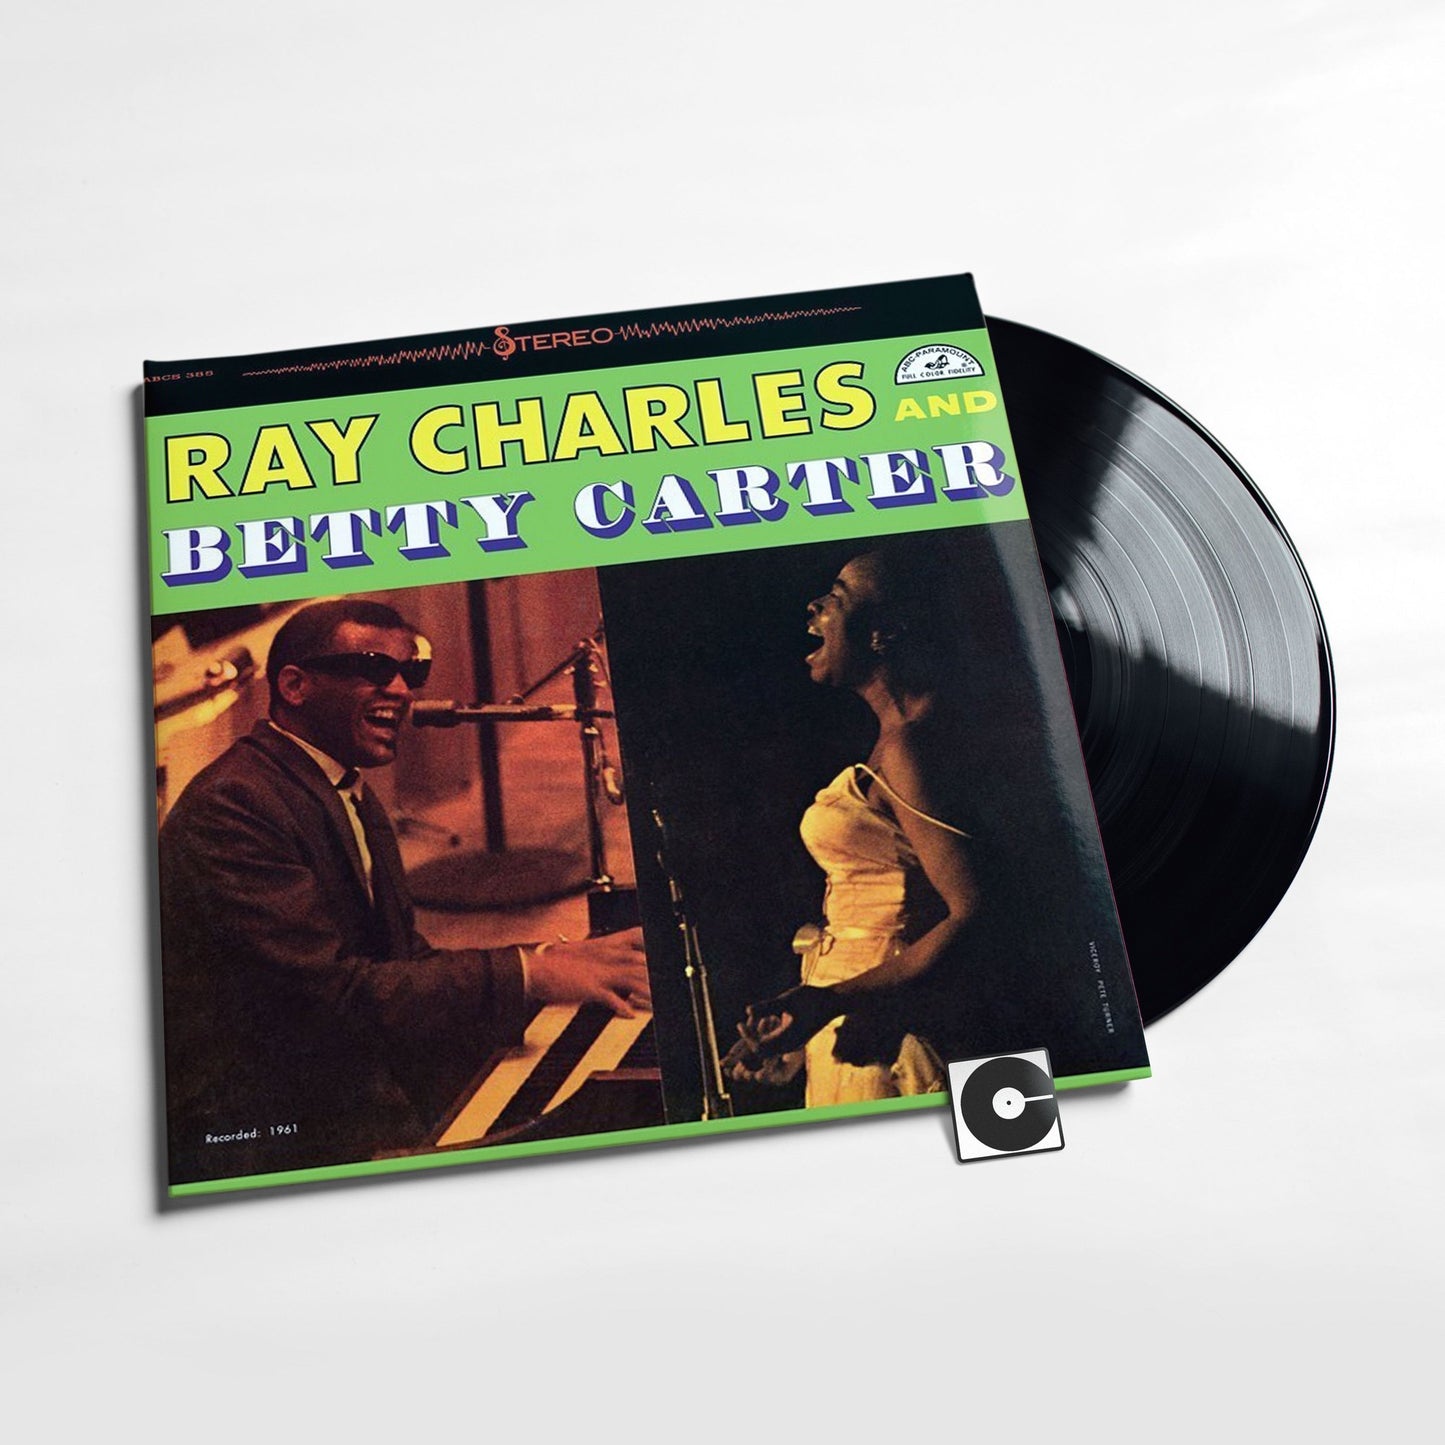 Ray Charles - "Ray Charles and Betty Carter" Analogue Productions